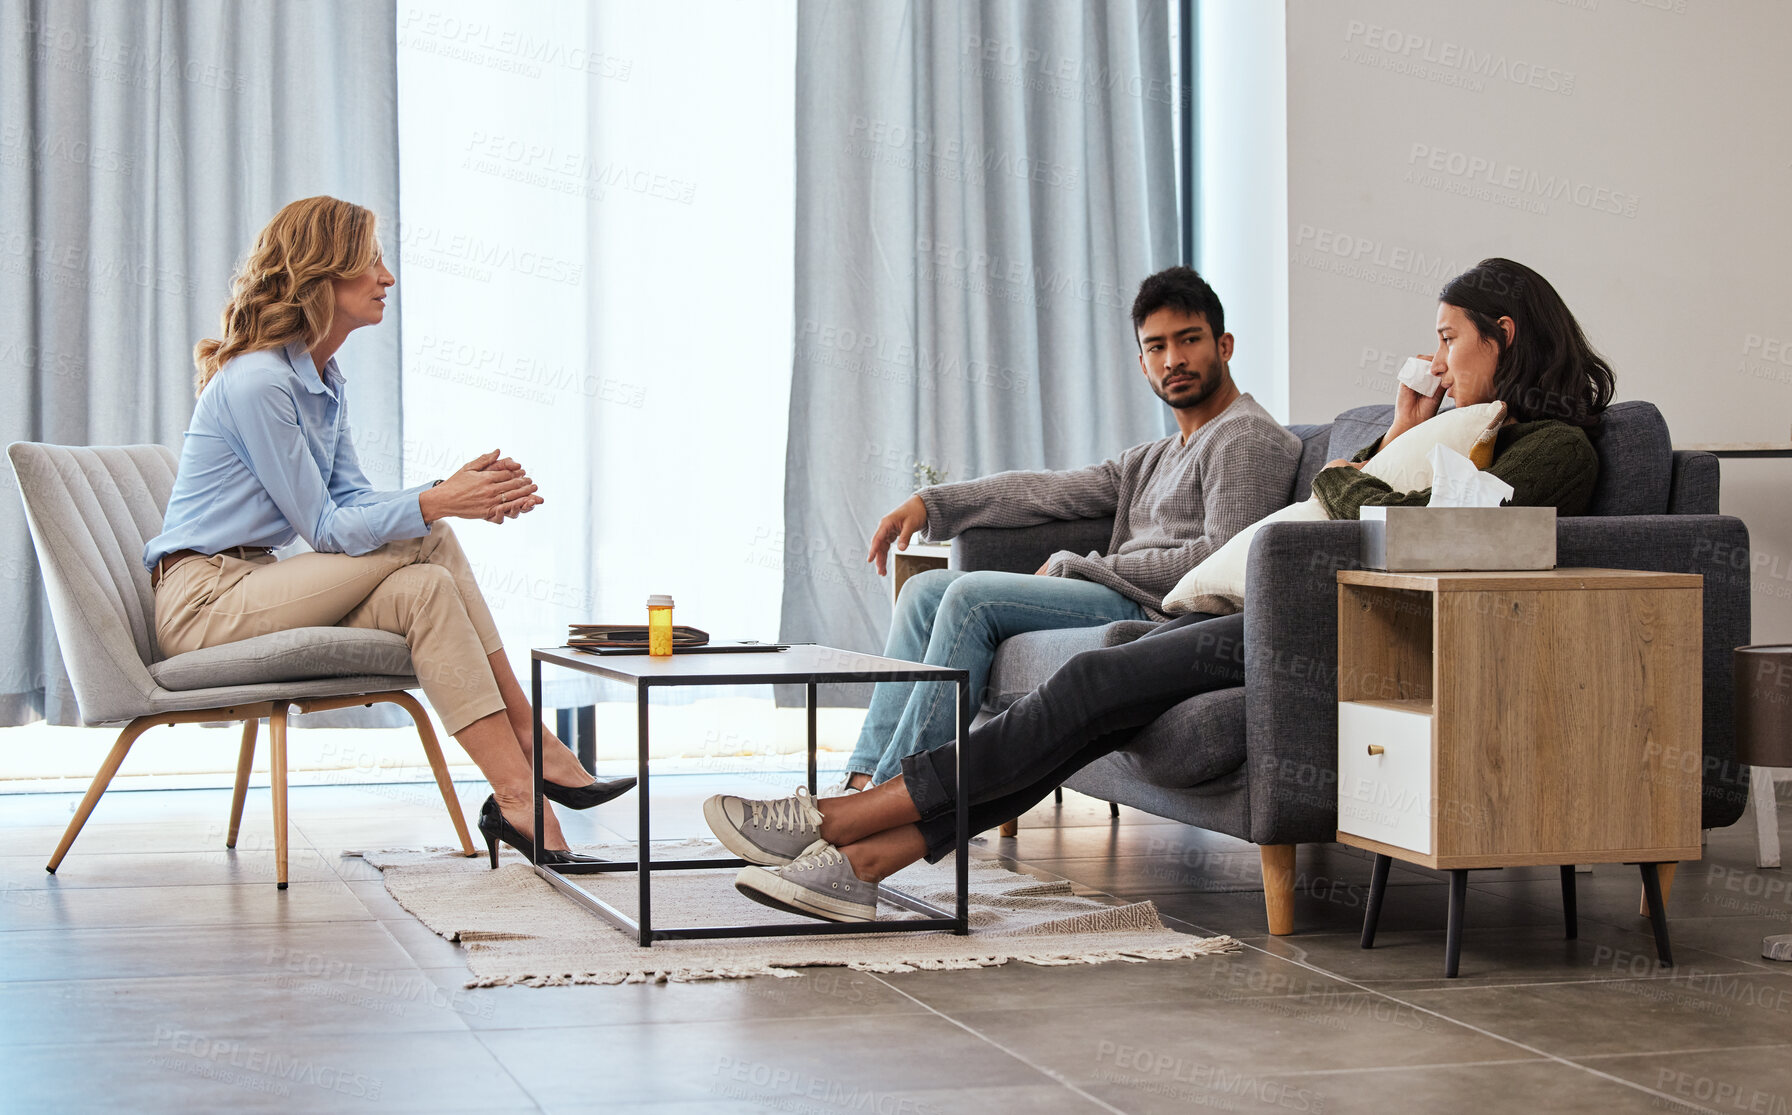 Buy stock photo Shot of a couple having an argument during a counseling session with a therapist